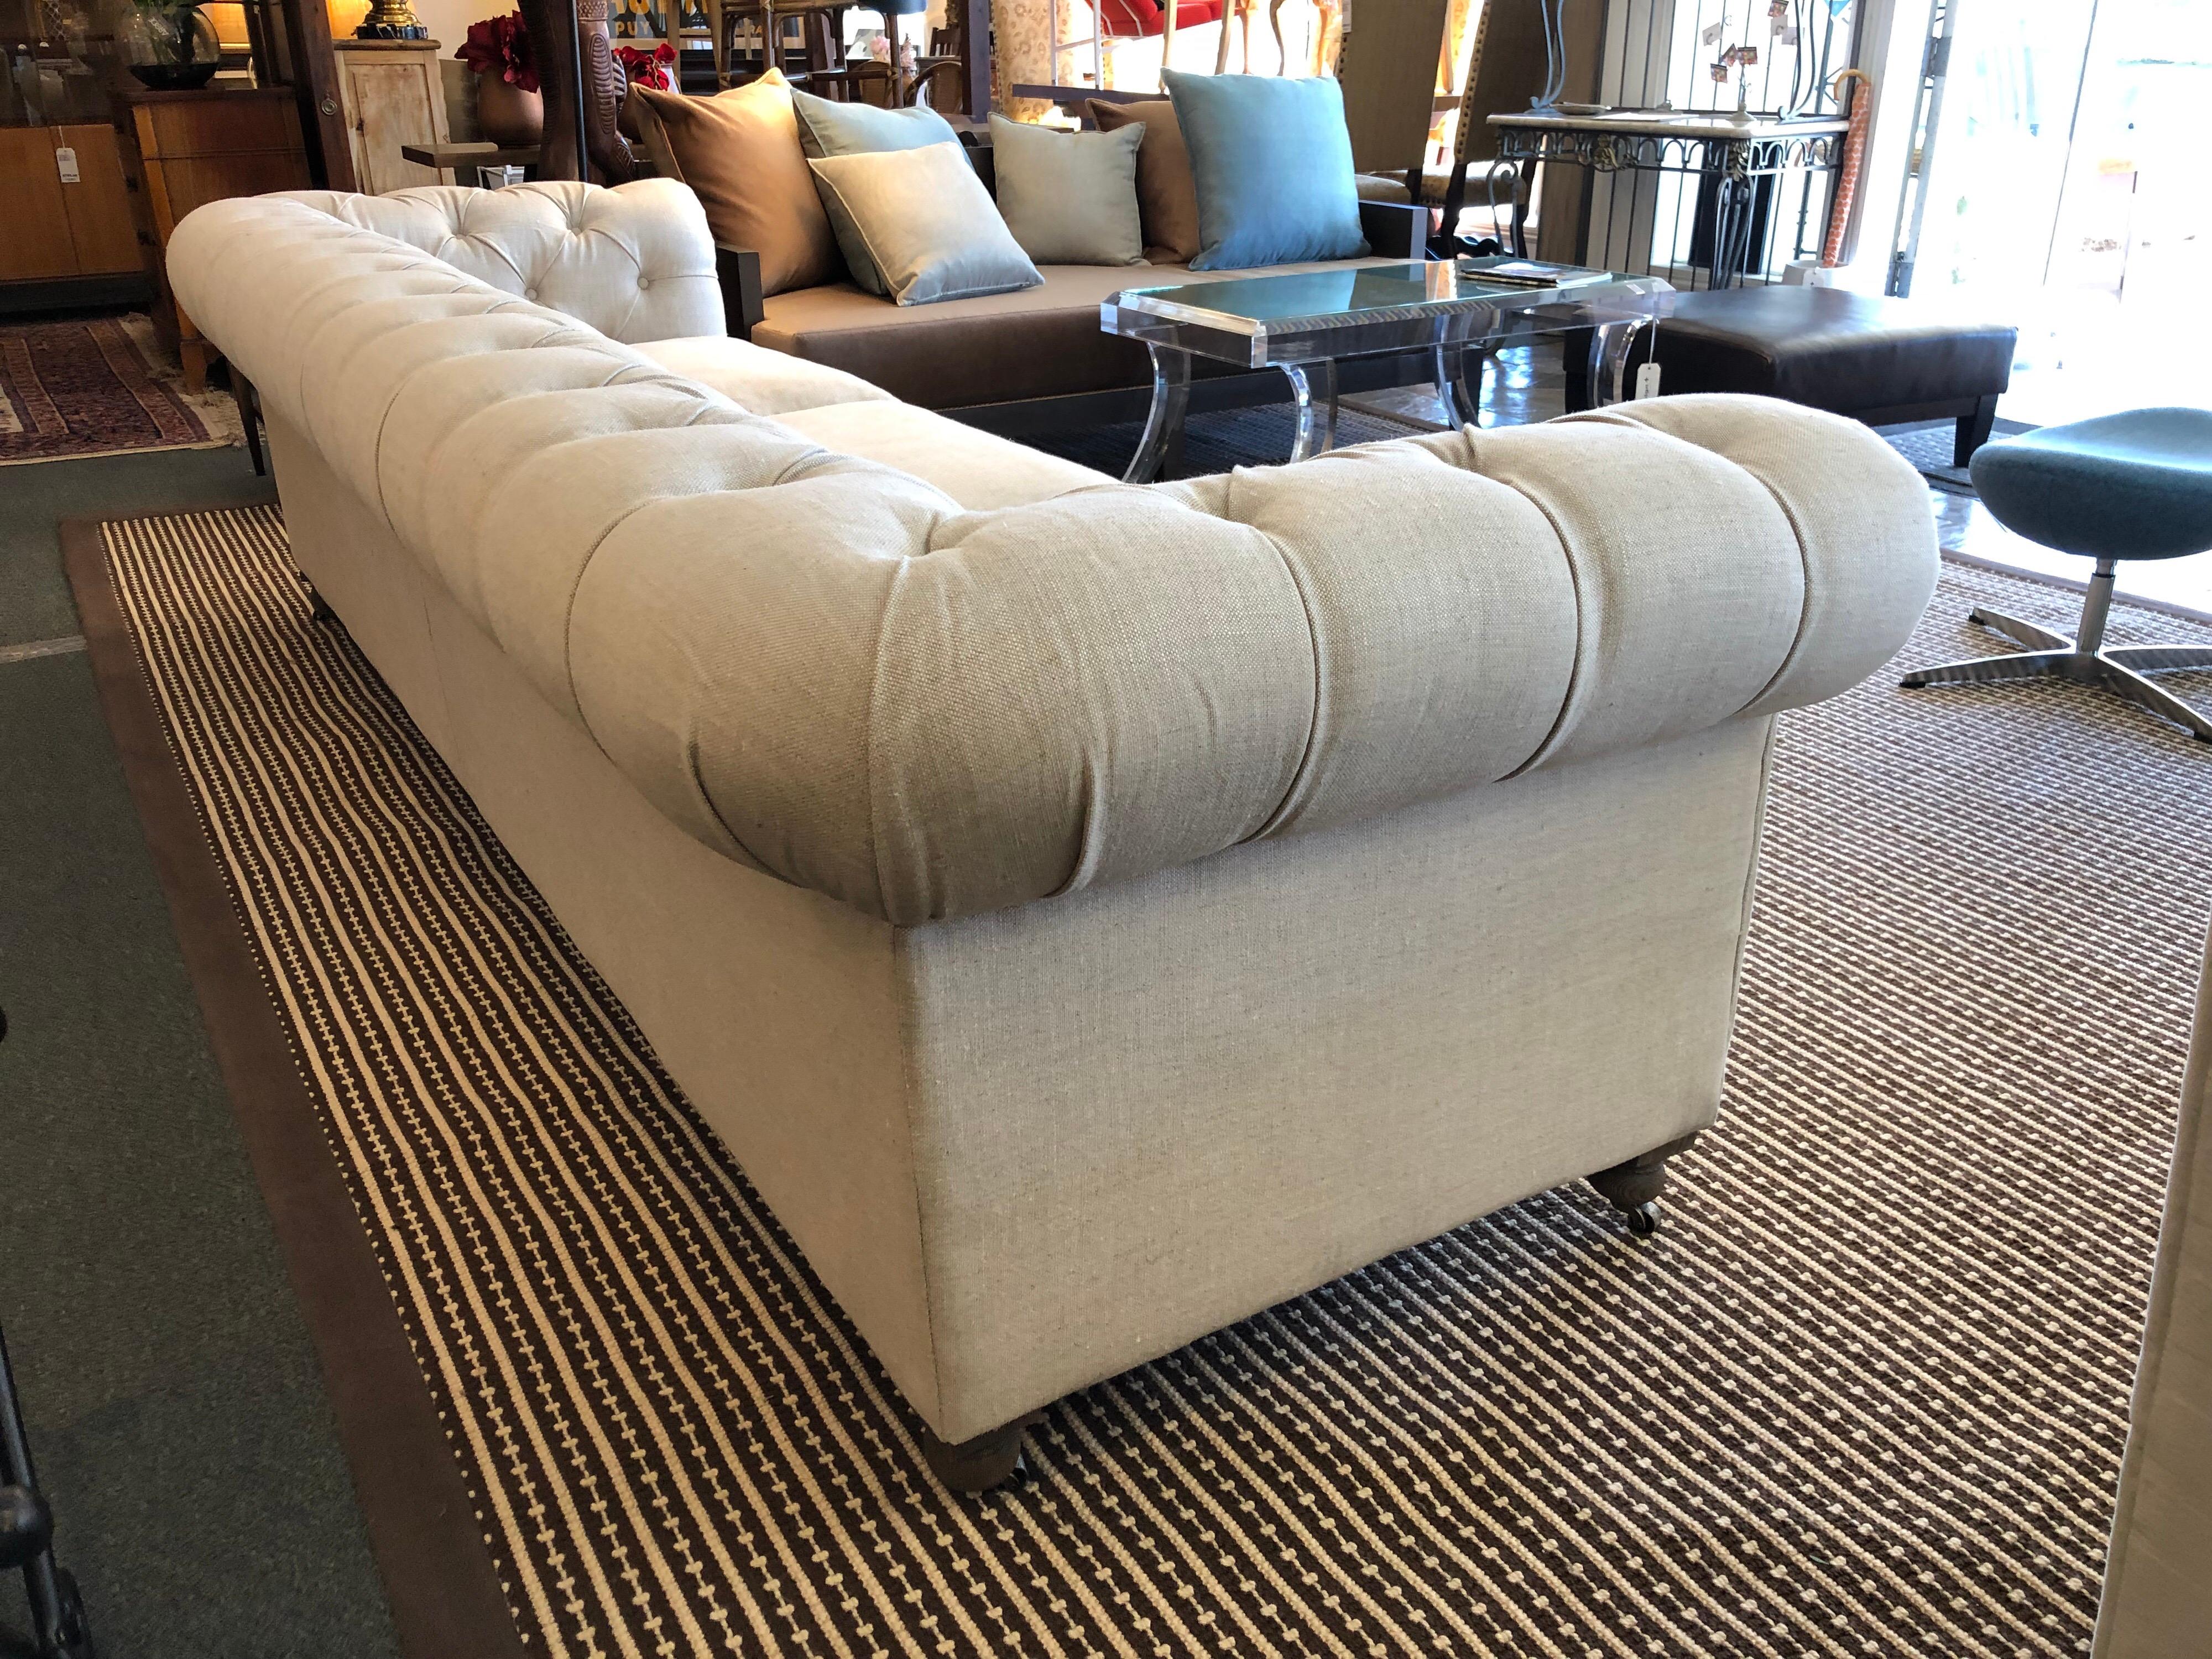 Restoration Hardware Timothy Oulton Kensington Fabric Sofa In Good Condition For Sale In San Francisco, CA